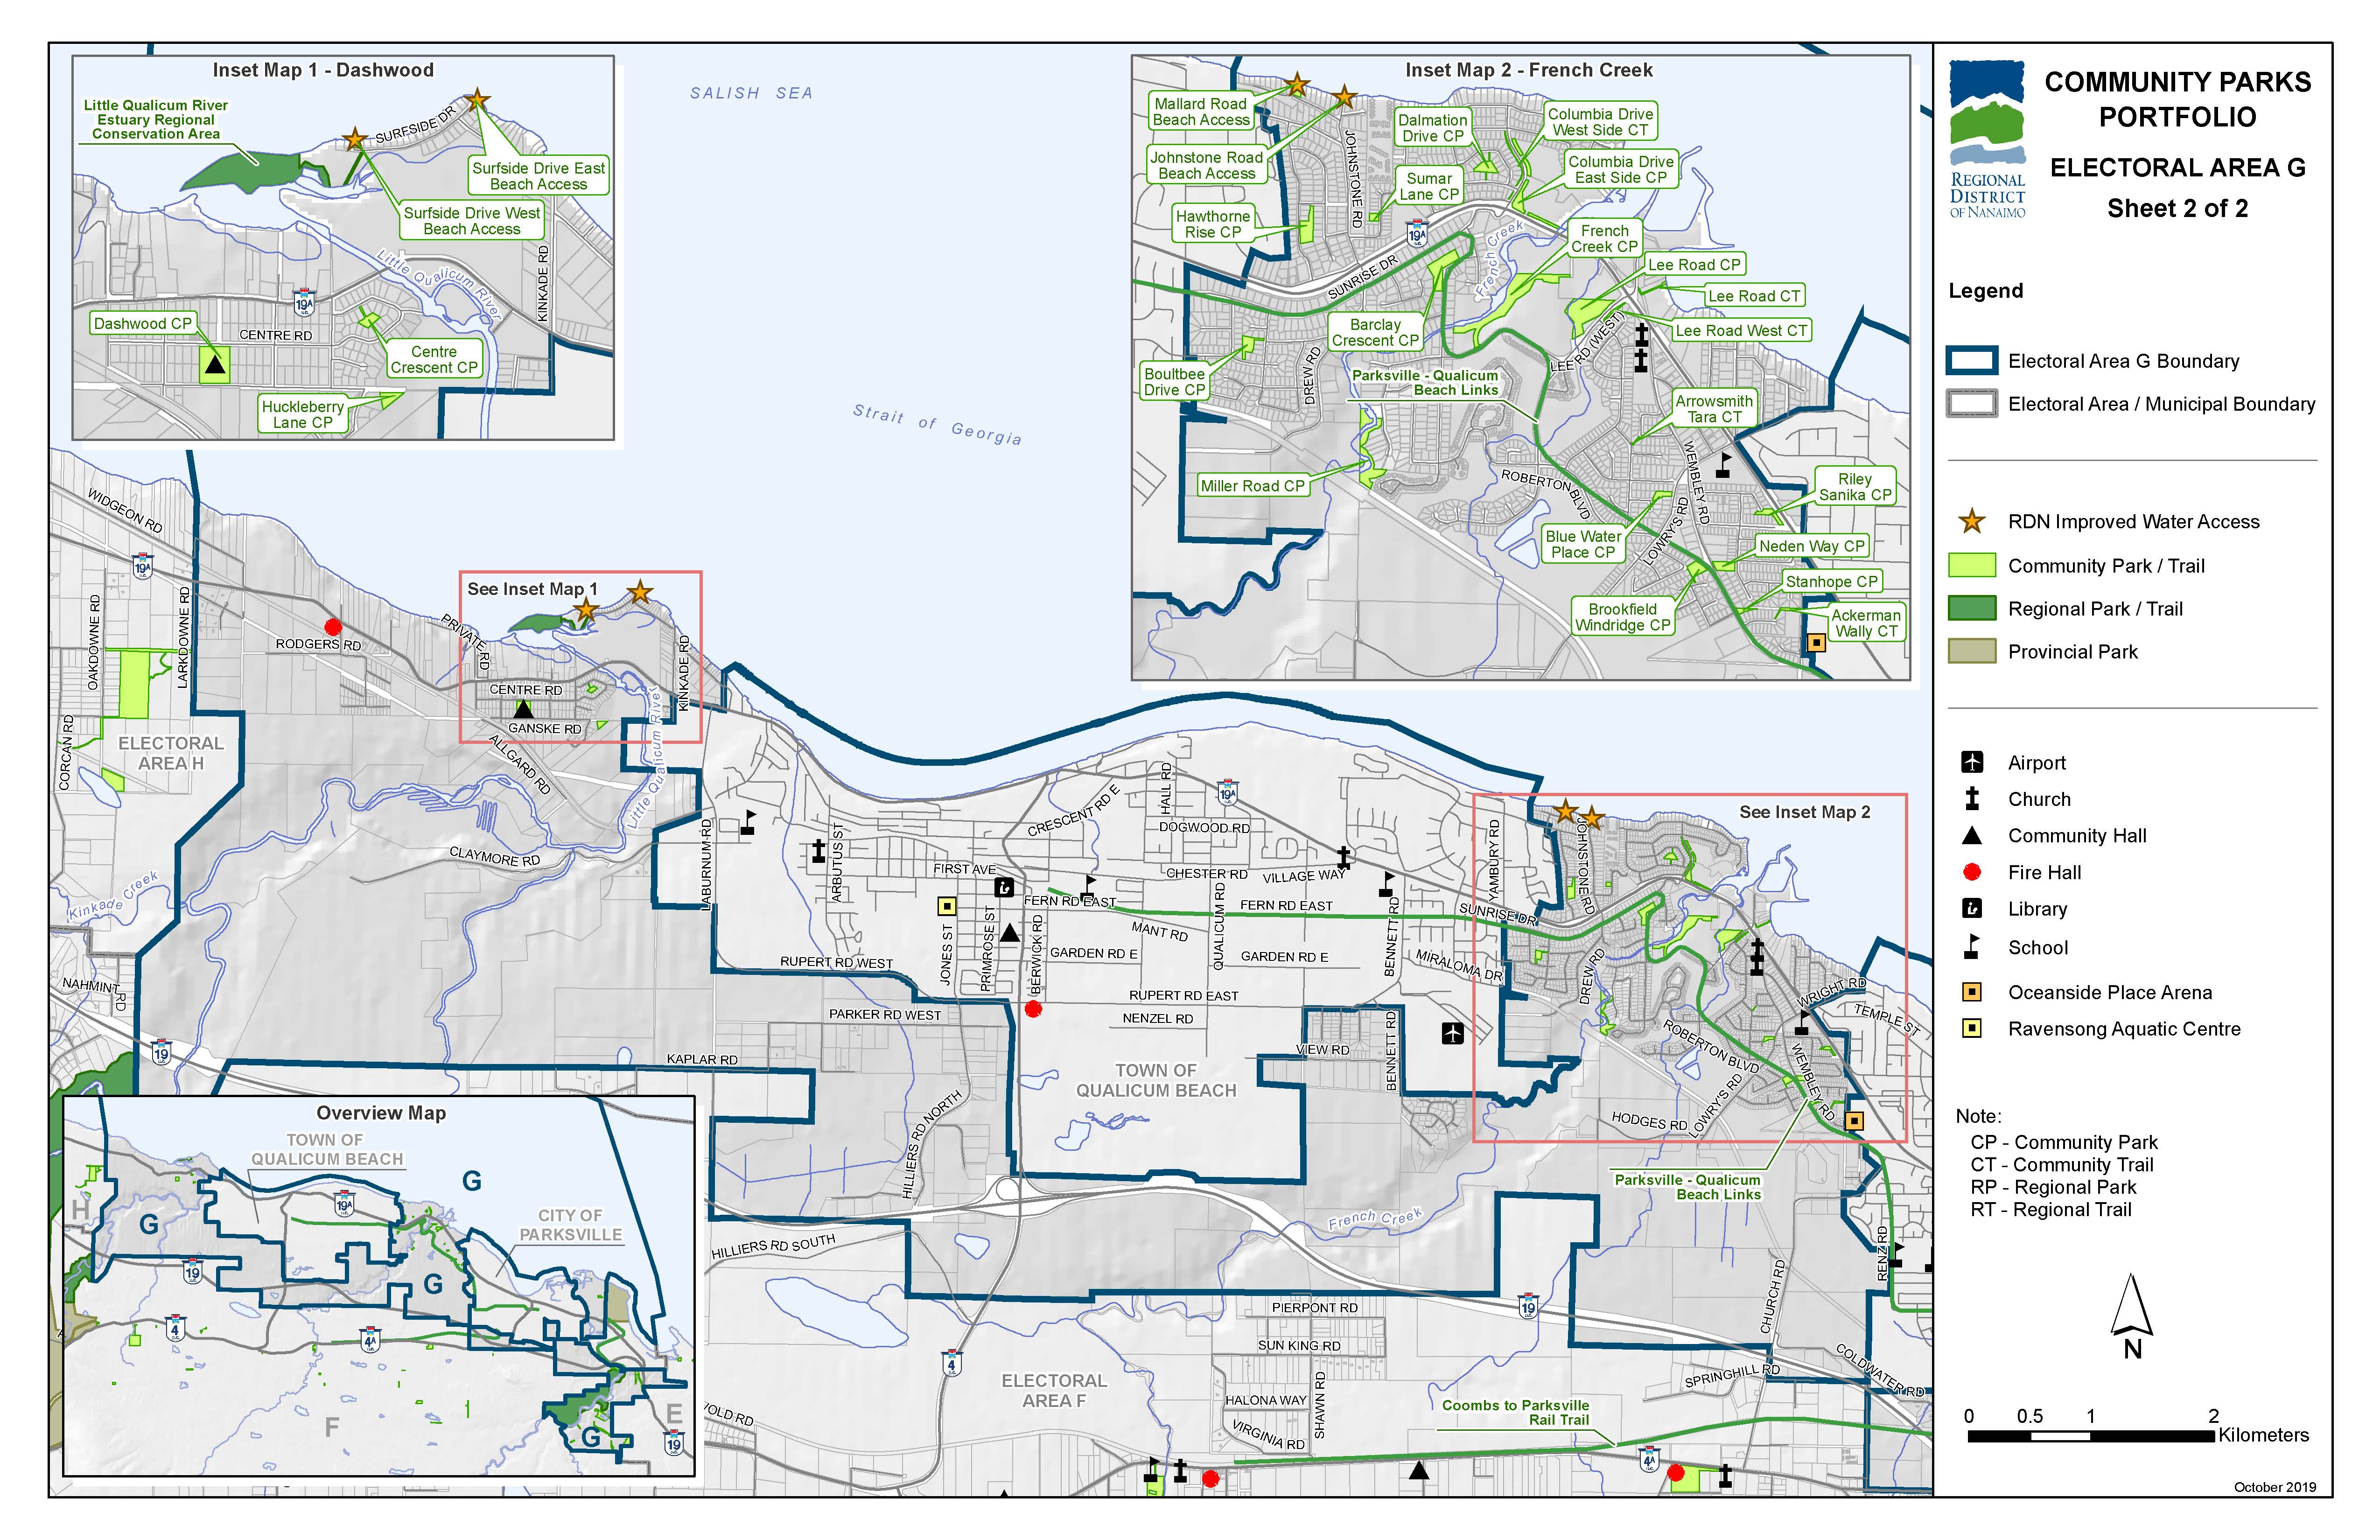 Community Parks and Trails in Area G (West)